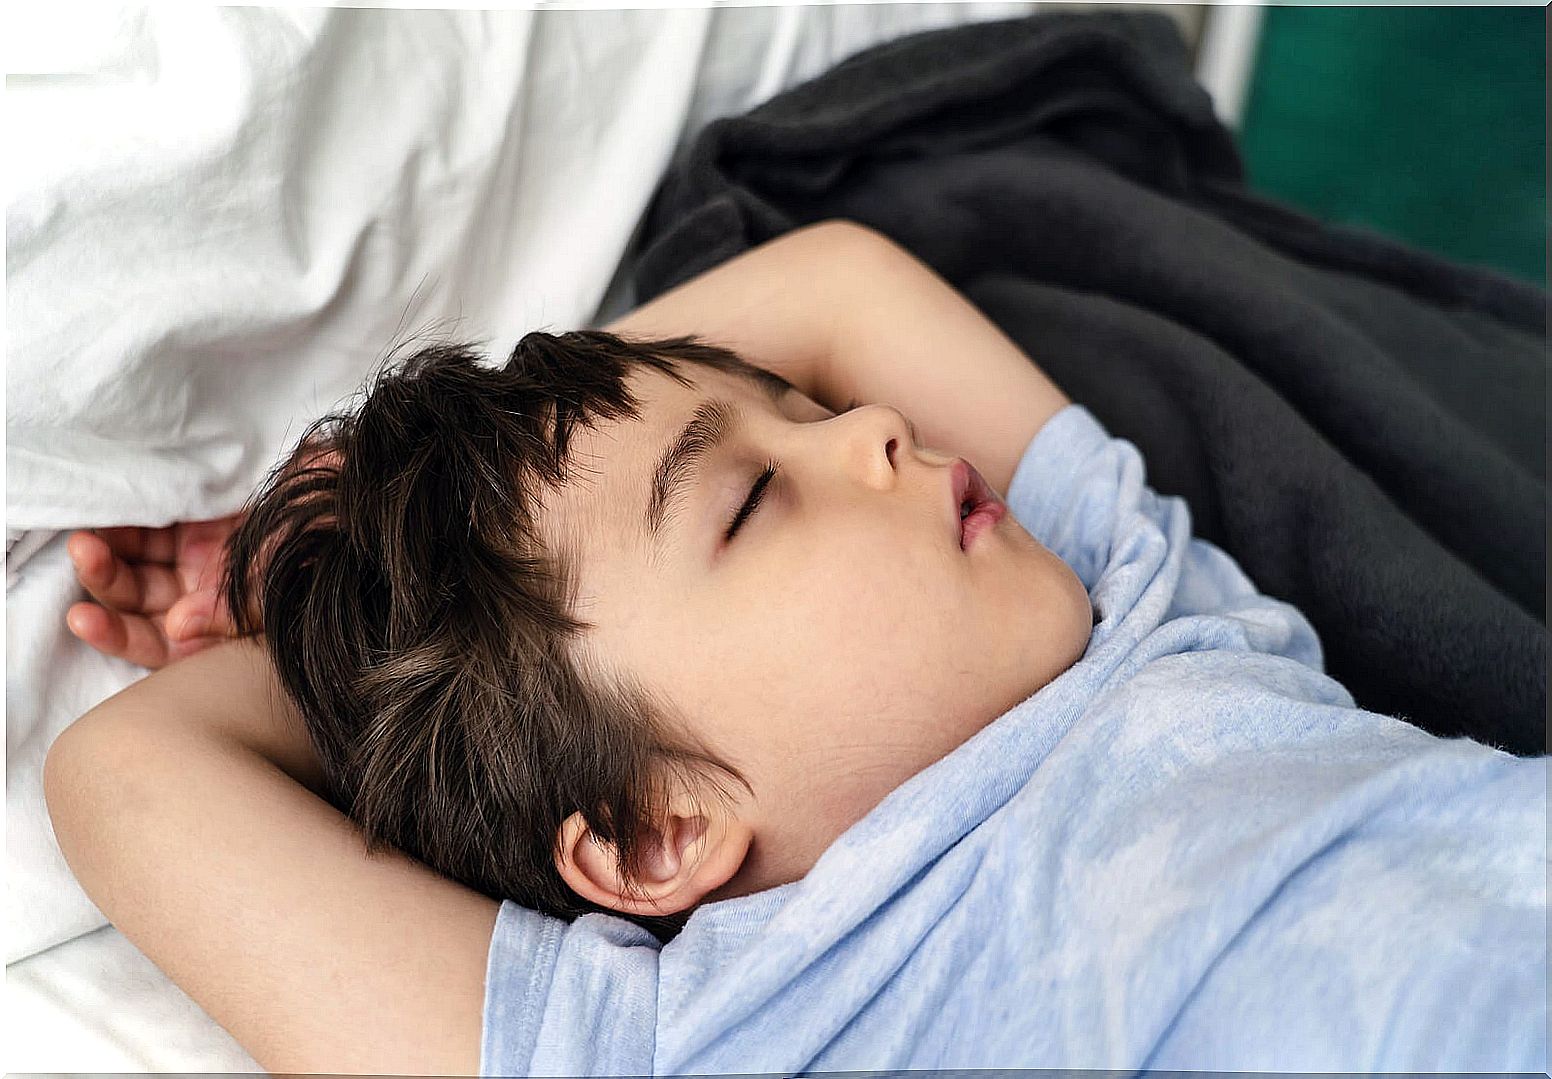 Does sleeping well make the child smarter?